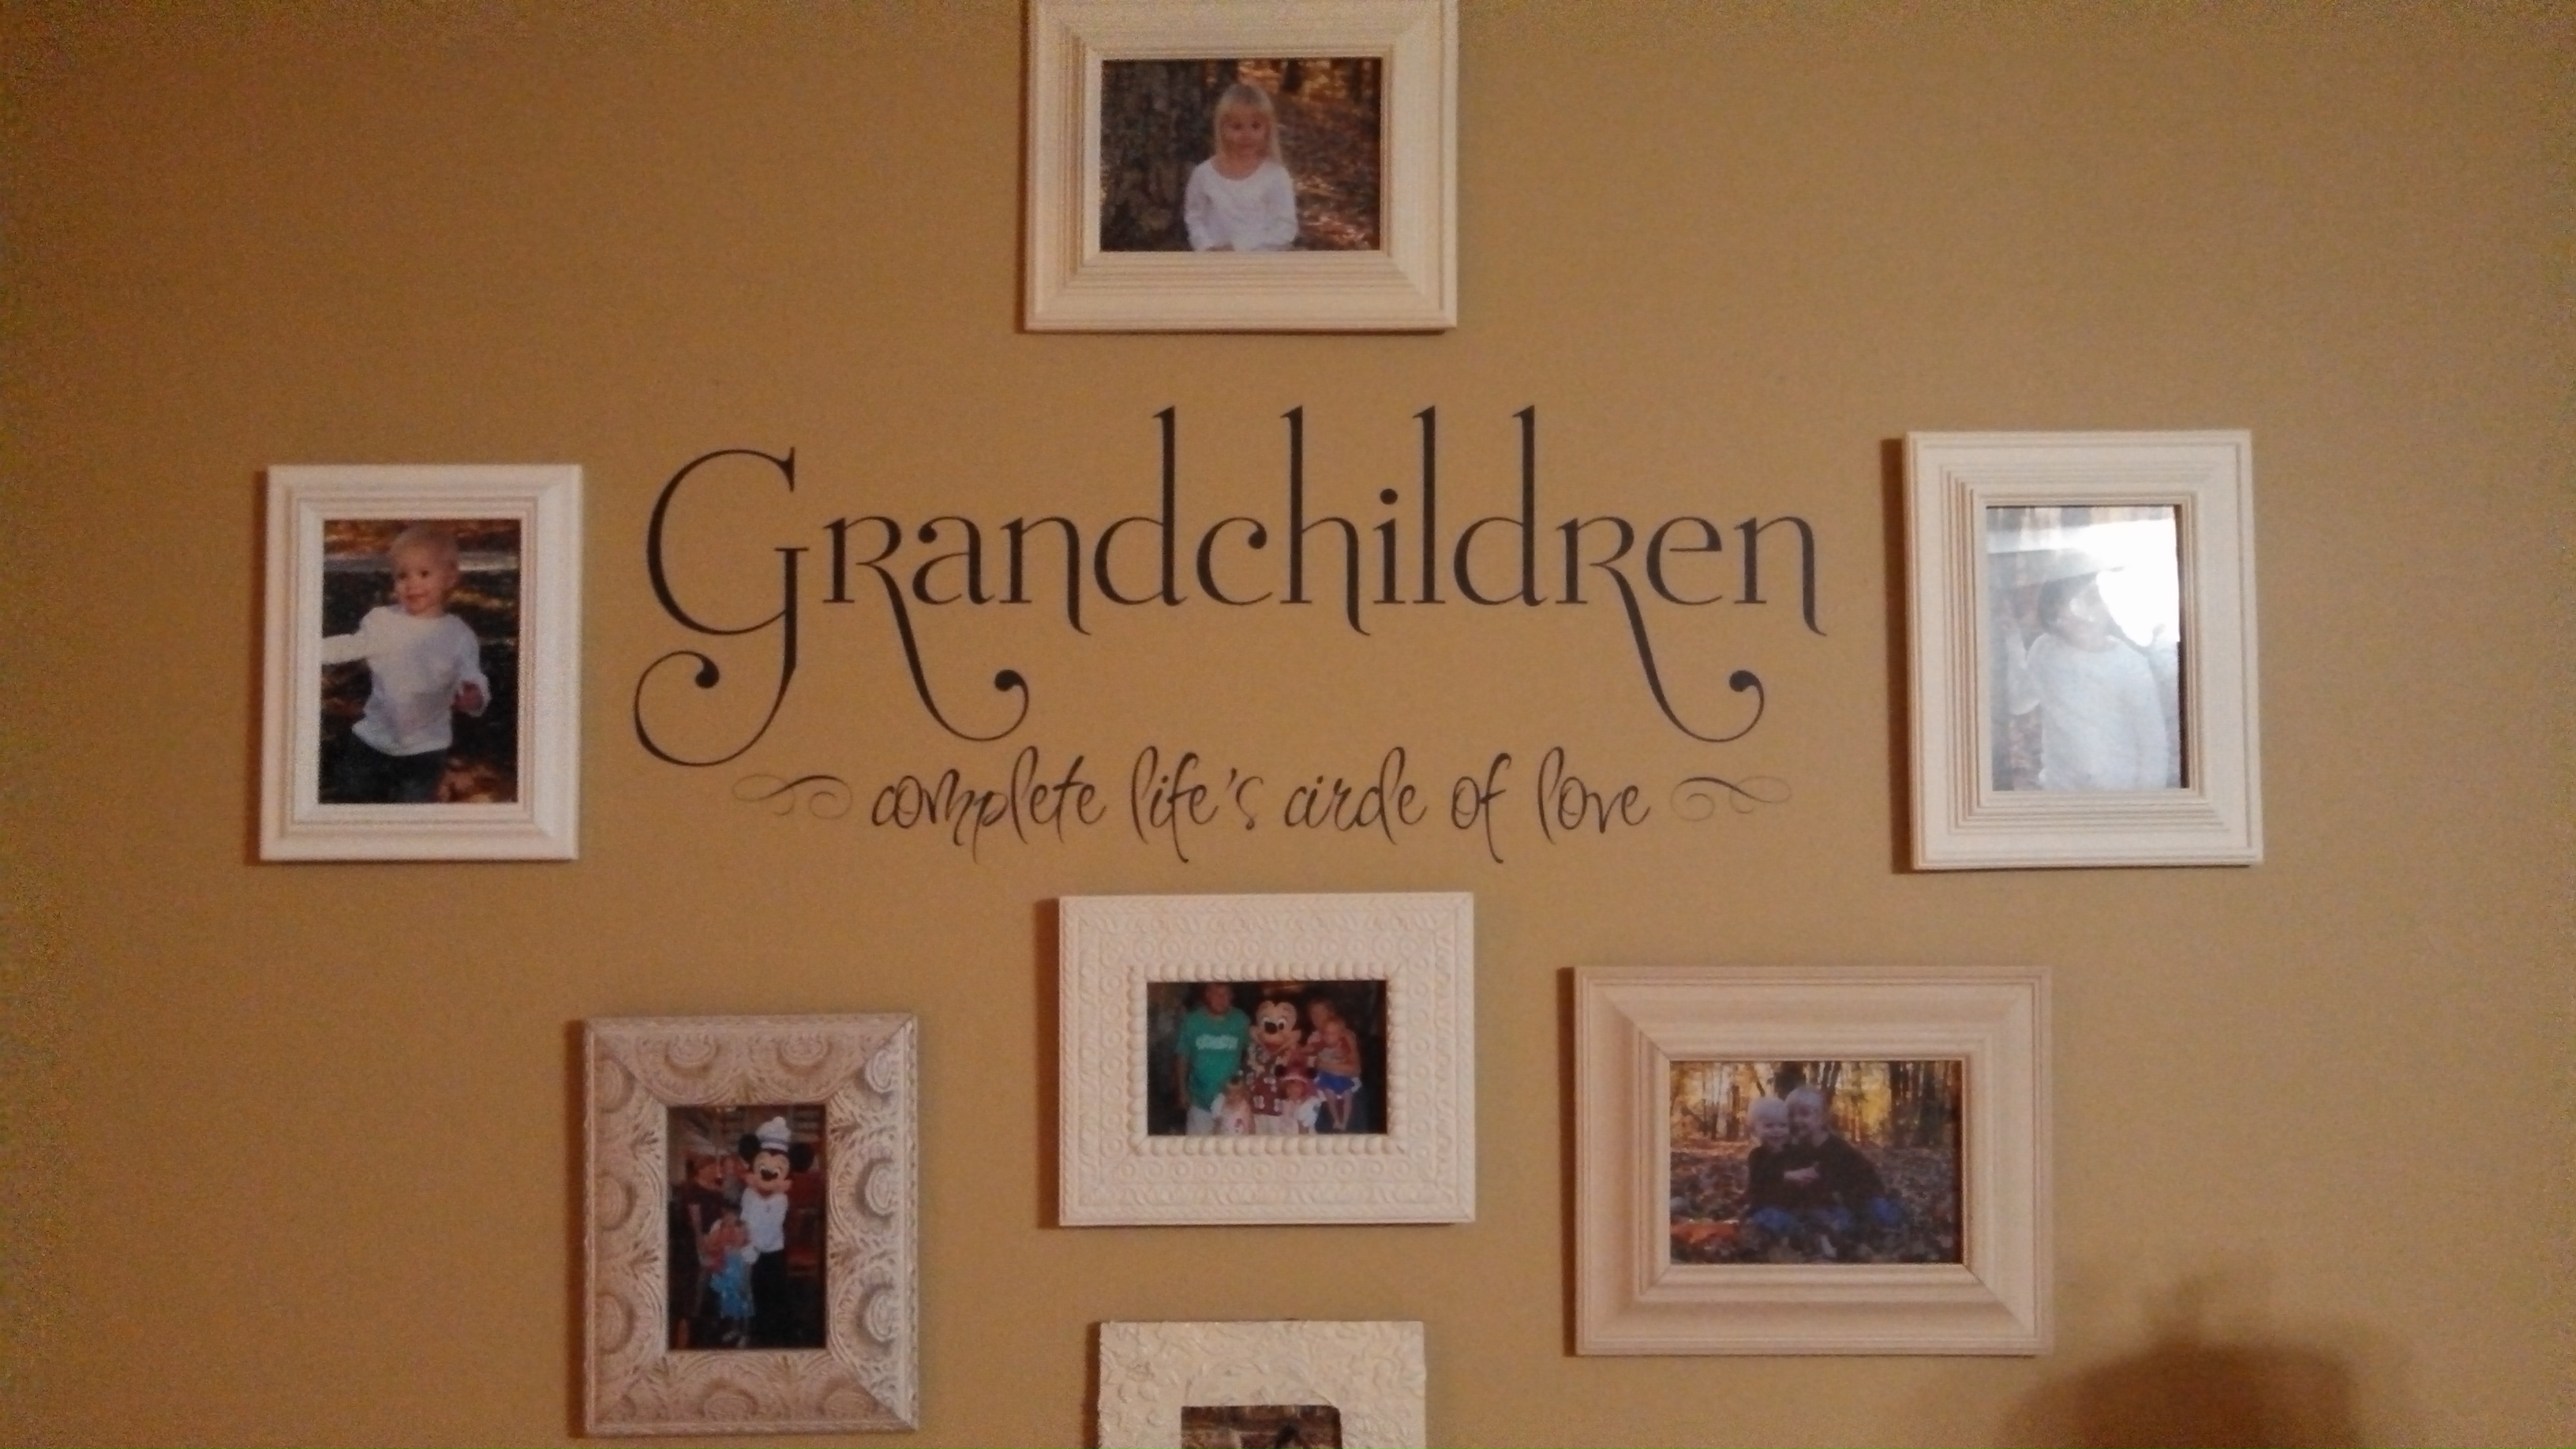 Grandchildren Complete Life's Circle Wall Decal